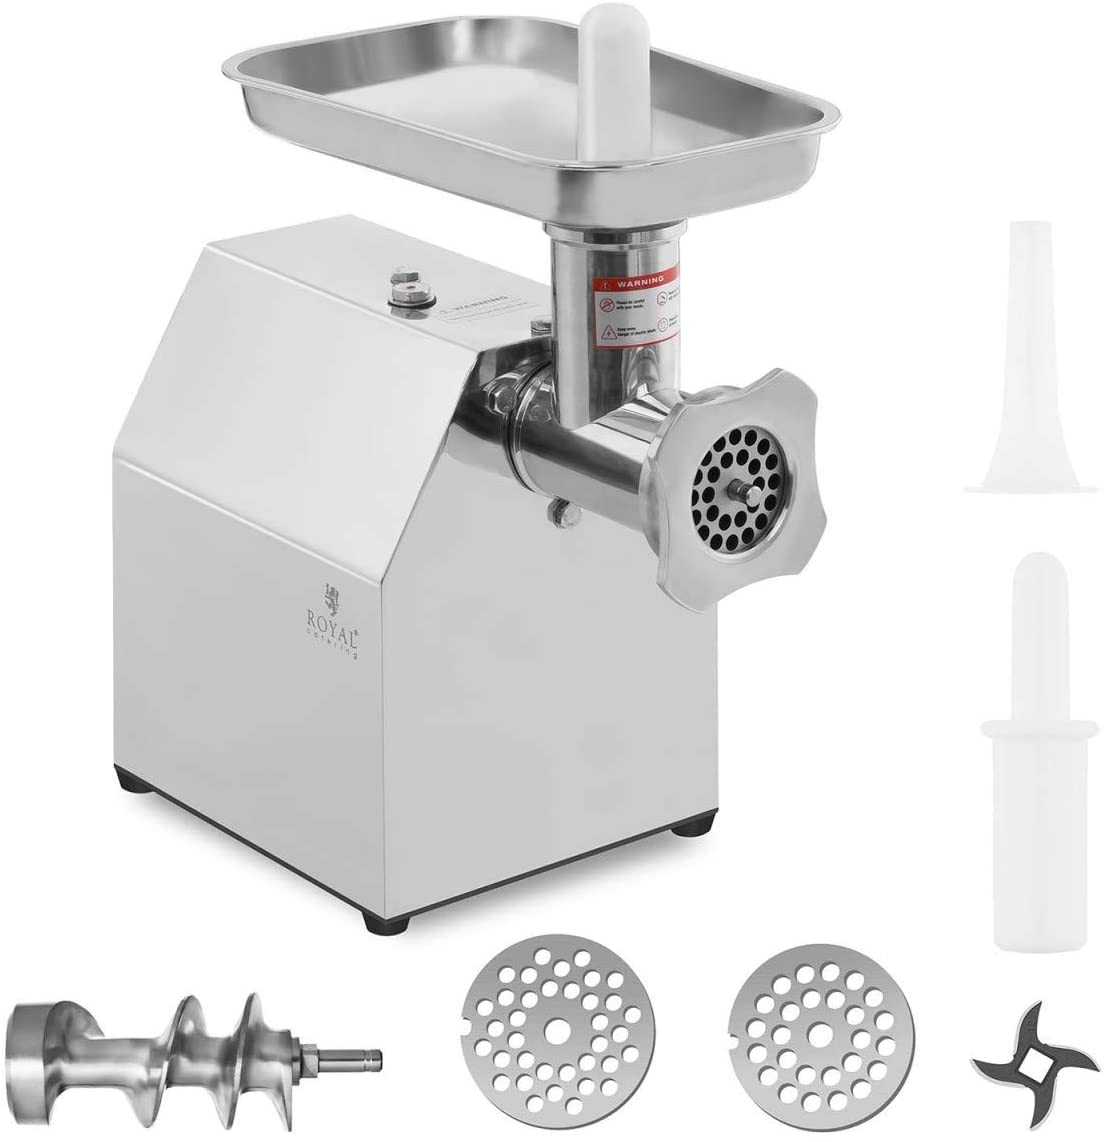 Royal Catering Rcfw 140 – 850ECO Meat Grinder Stainless Steel Electric Meat Machine (140 kg/h, 850 W, Reverse Feature, Hole size 6/8 mm Eco